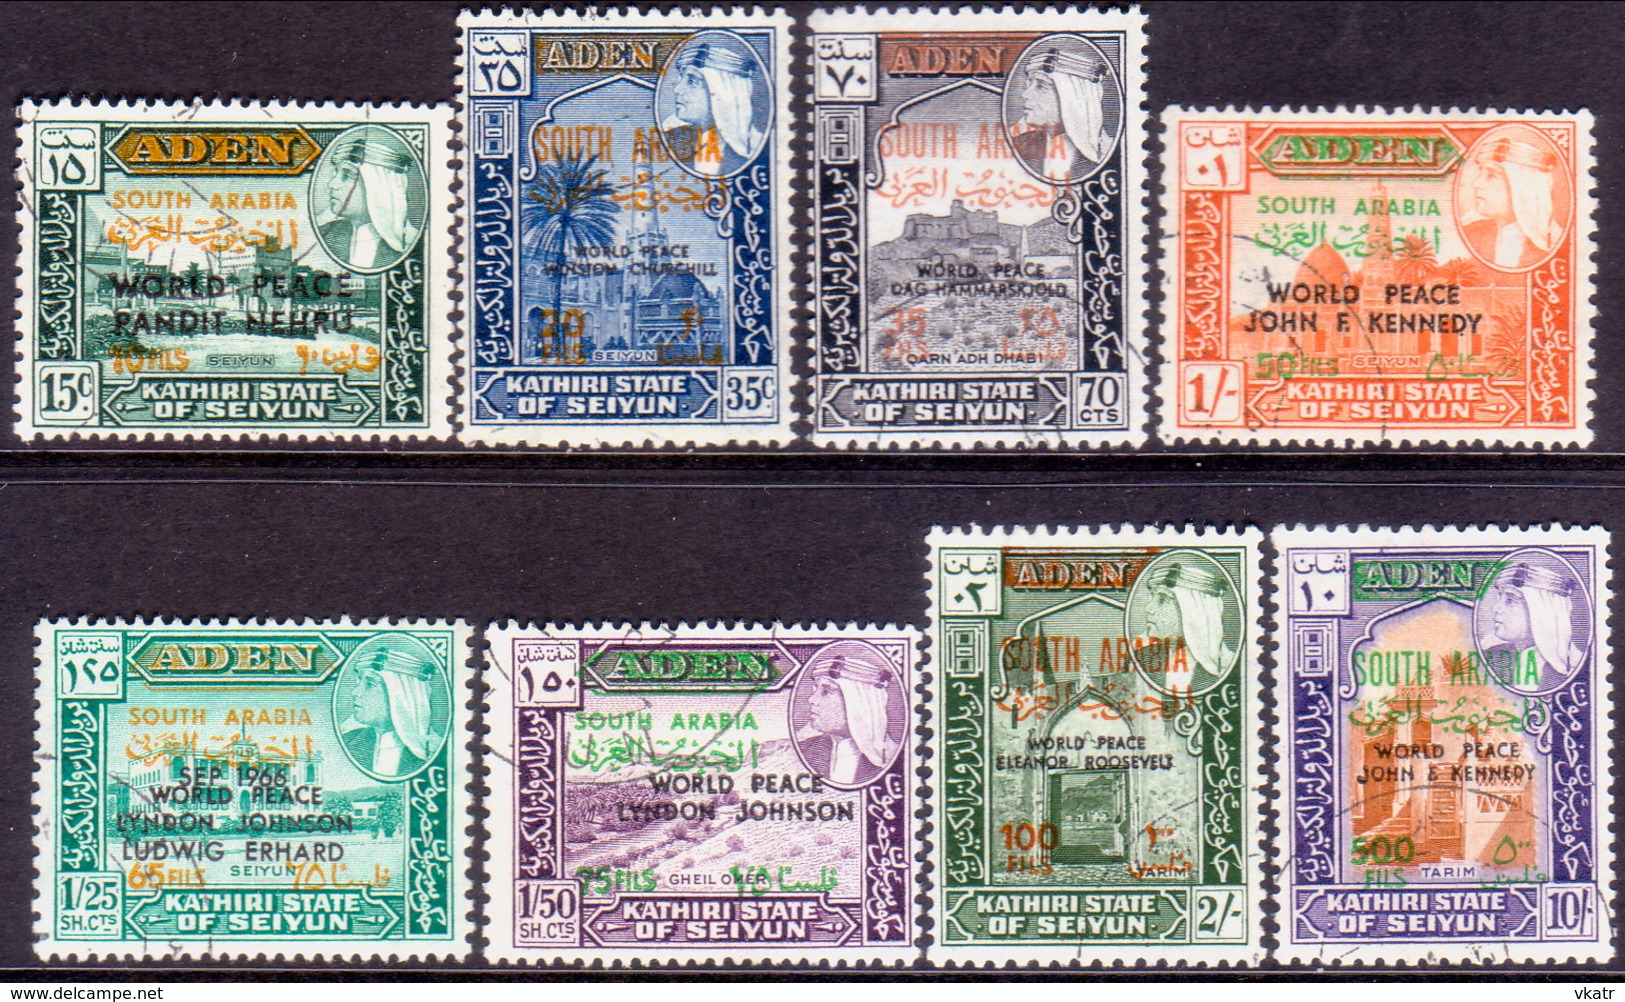 SOUTH ARABIA SEIYUN 1967 SG #99//107 Set Used Only #106 Missing World Peace - Asia (Other)